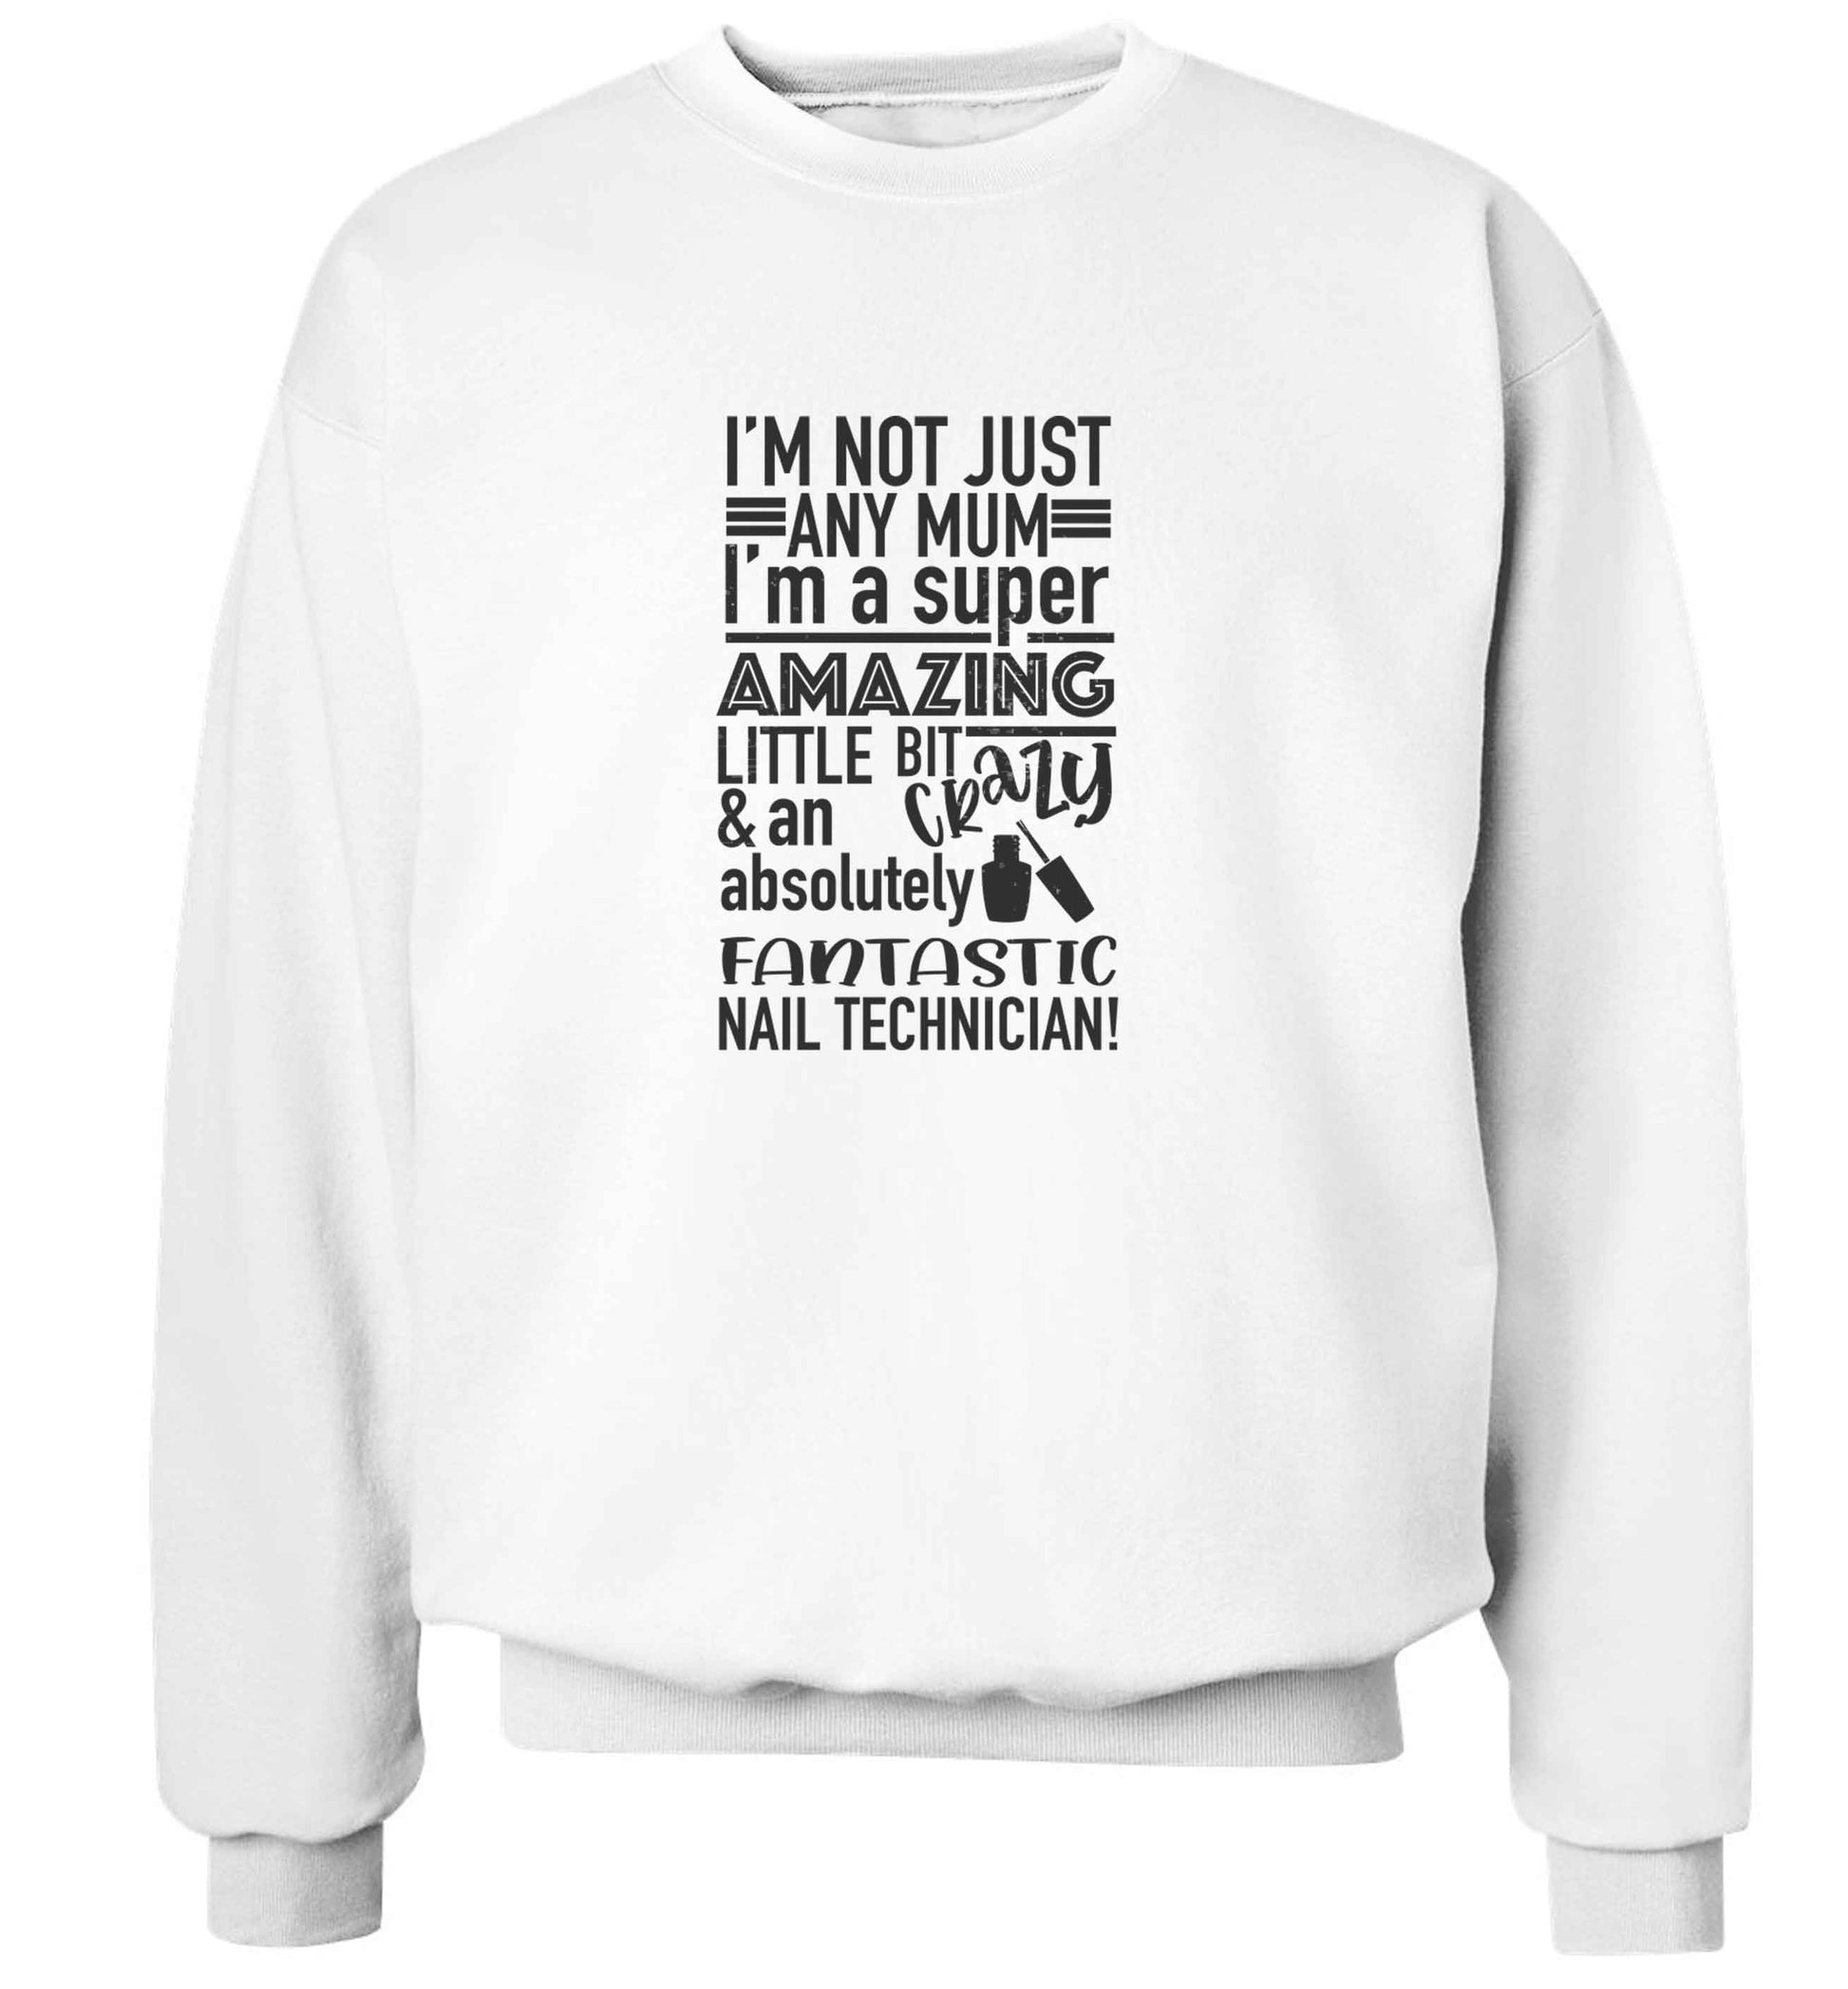 I'm not just any mum I'm a super amazing little bit crazy and an absolutely fantastic nail technician! adult's unisex white sweater 2XL